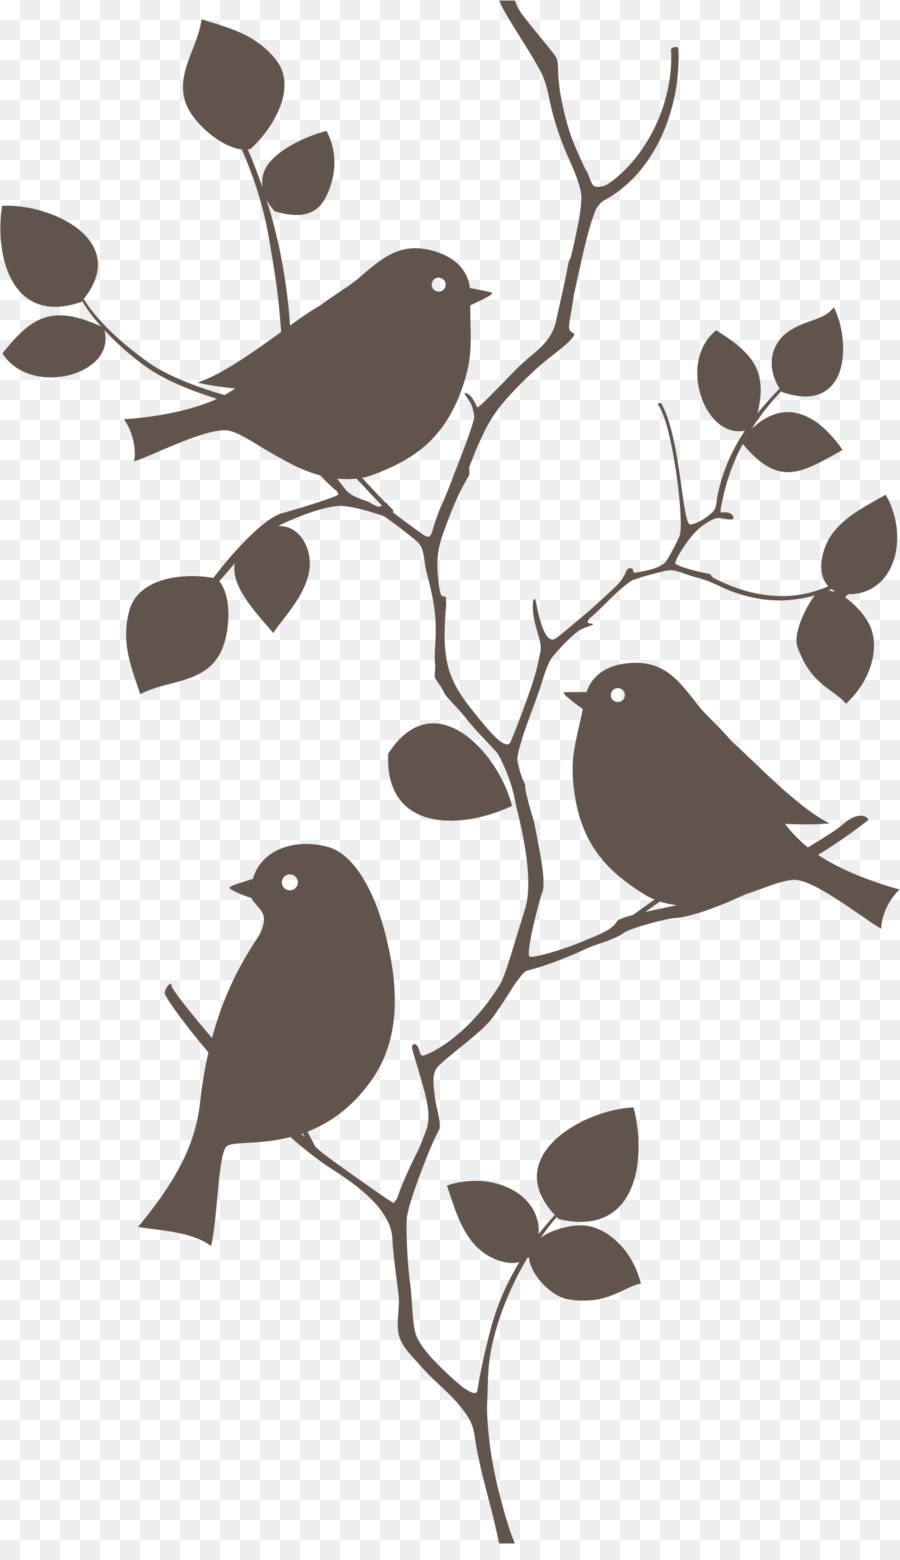 Bird Wall decal Mural Sticker Vector graphics - stone wall art installations png download - 1378*2364 - Free Transparent Bird png Download.